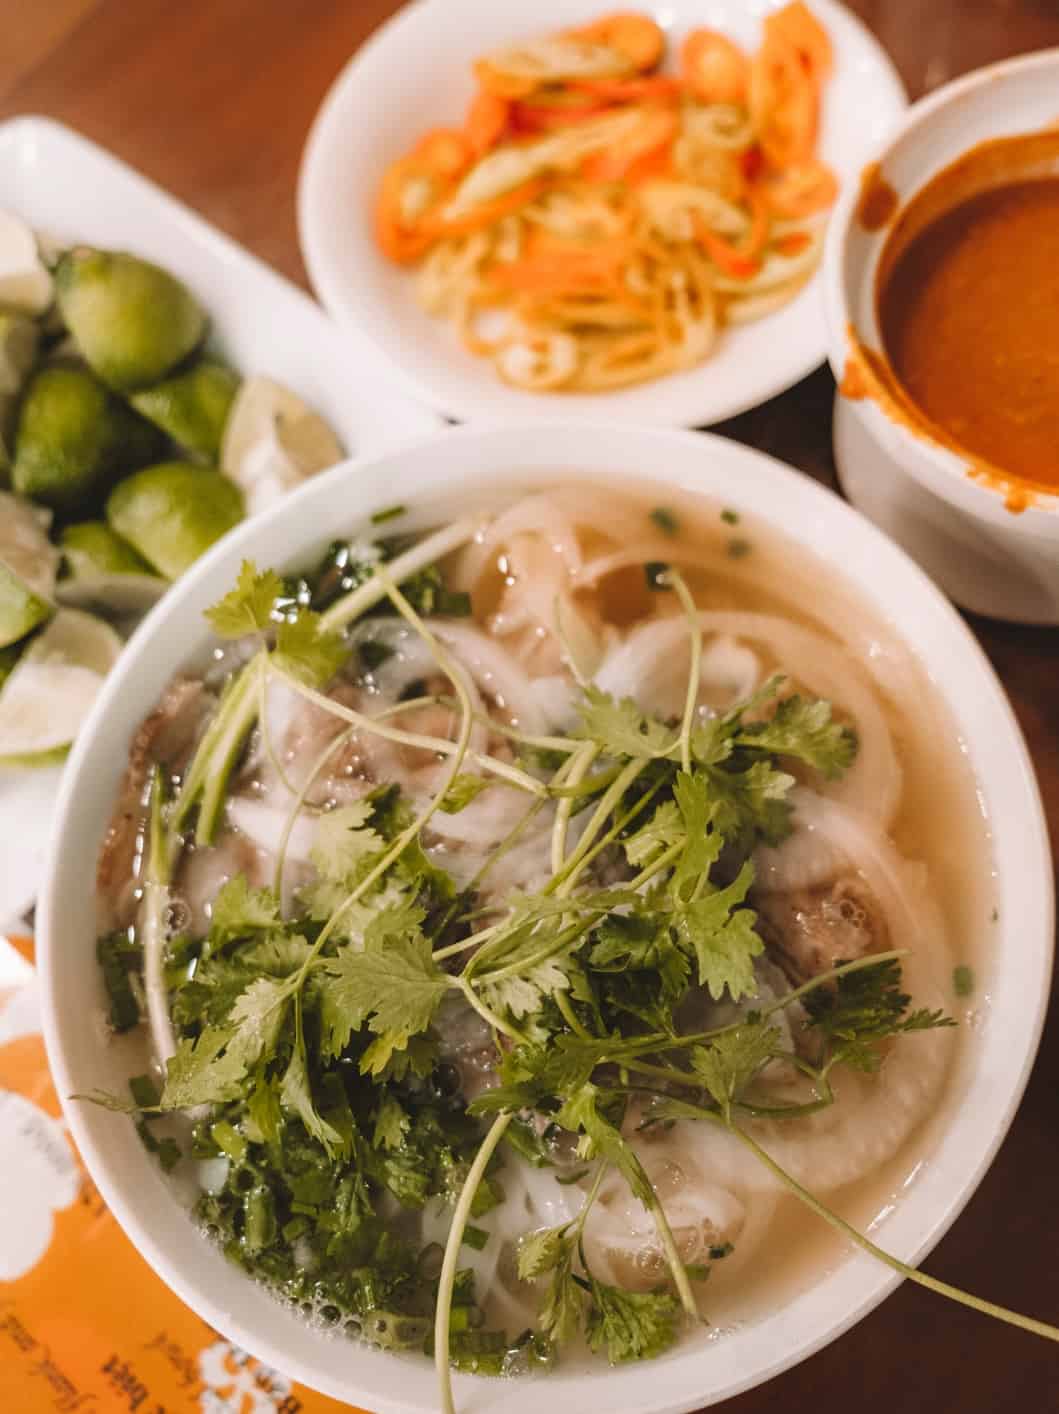 A delicious bowl of pho from Pho 10 Ly Quoc Su – some of the best street food in Hanoi